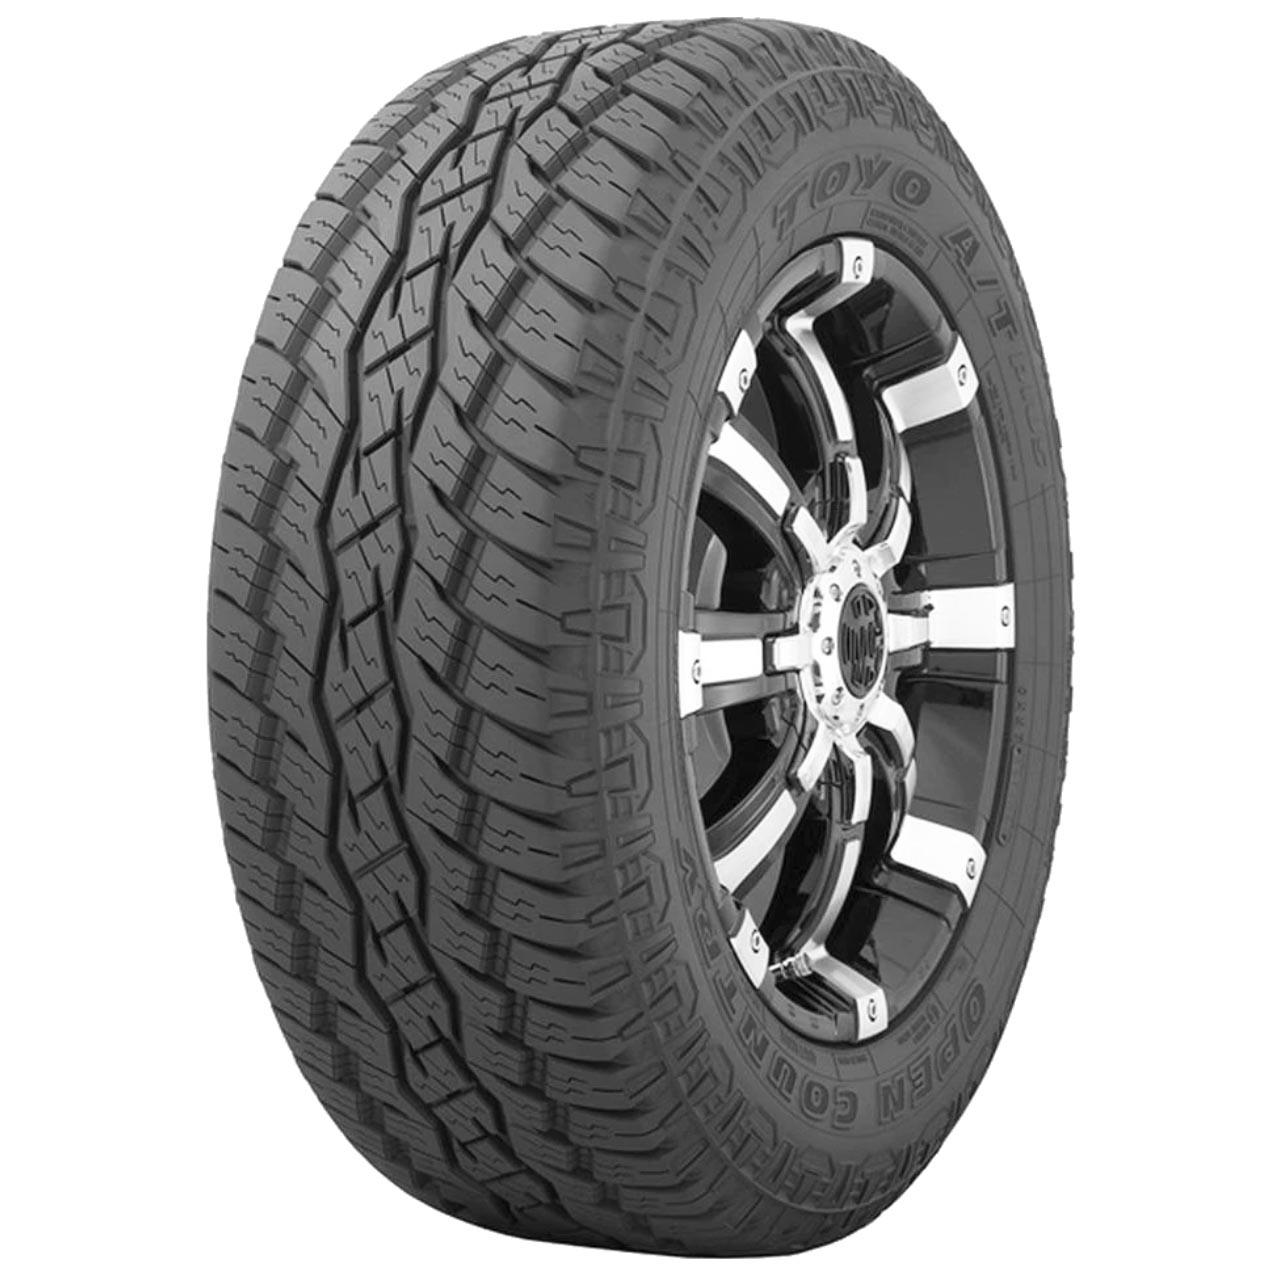 Toyo Open Country AT Plus 215/70R15 98T